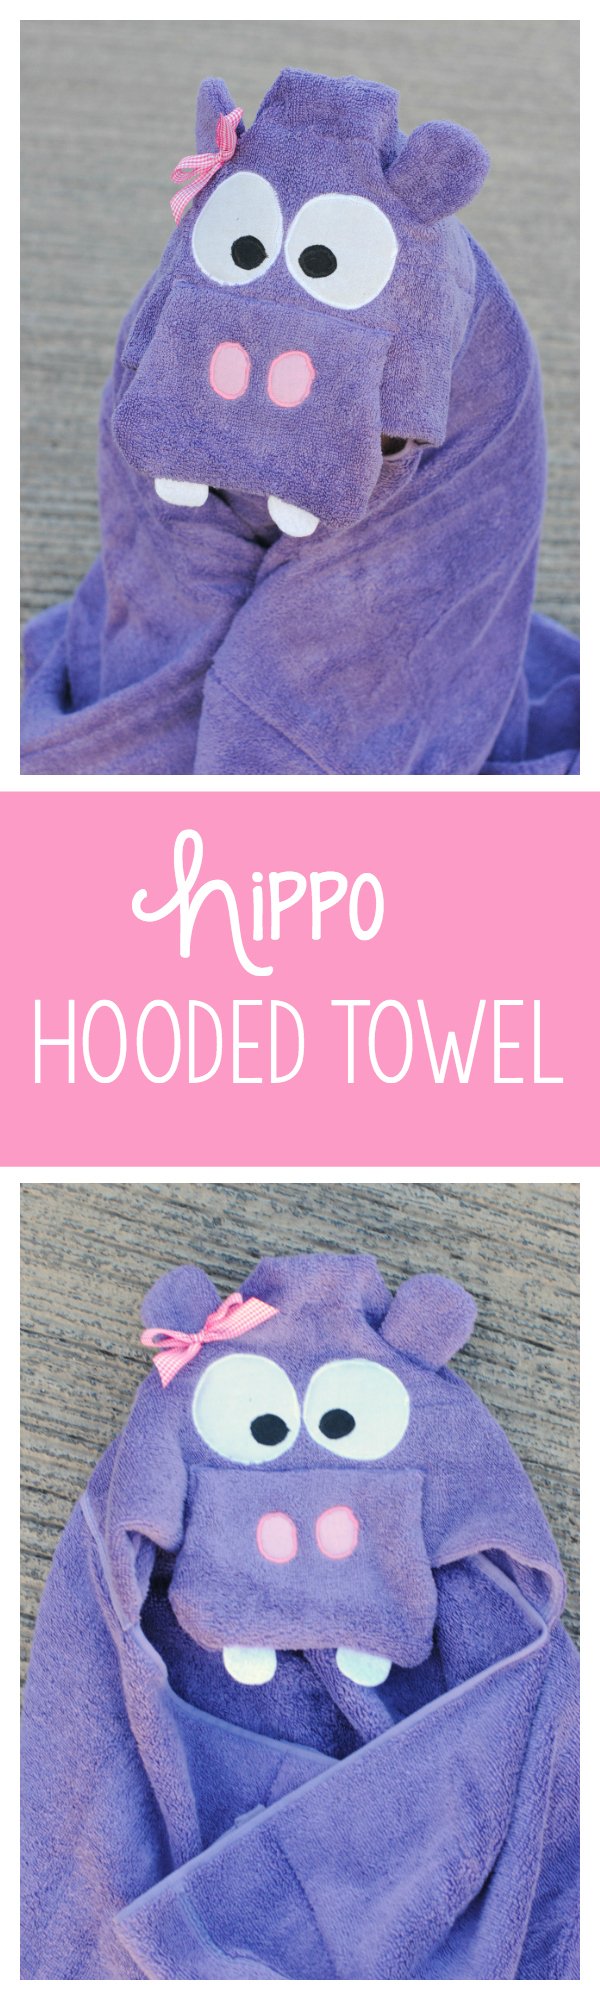 Hippo Hooded Towel Pattern-This hooded towel is so cute for babies, toddlers, preschoolers and even bigger kids! Makes a wonderful gift! #towels #kids #gifts #sewing #patterns